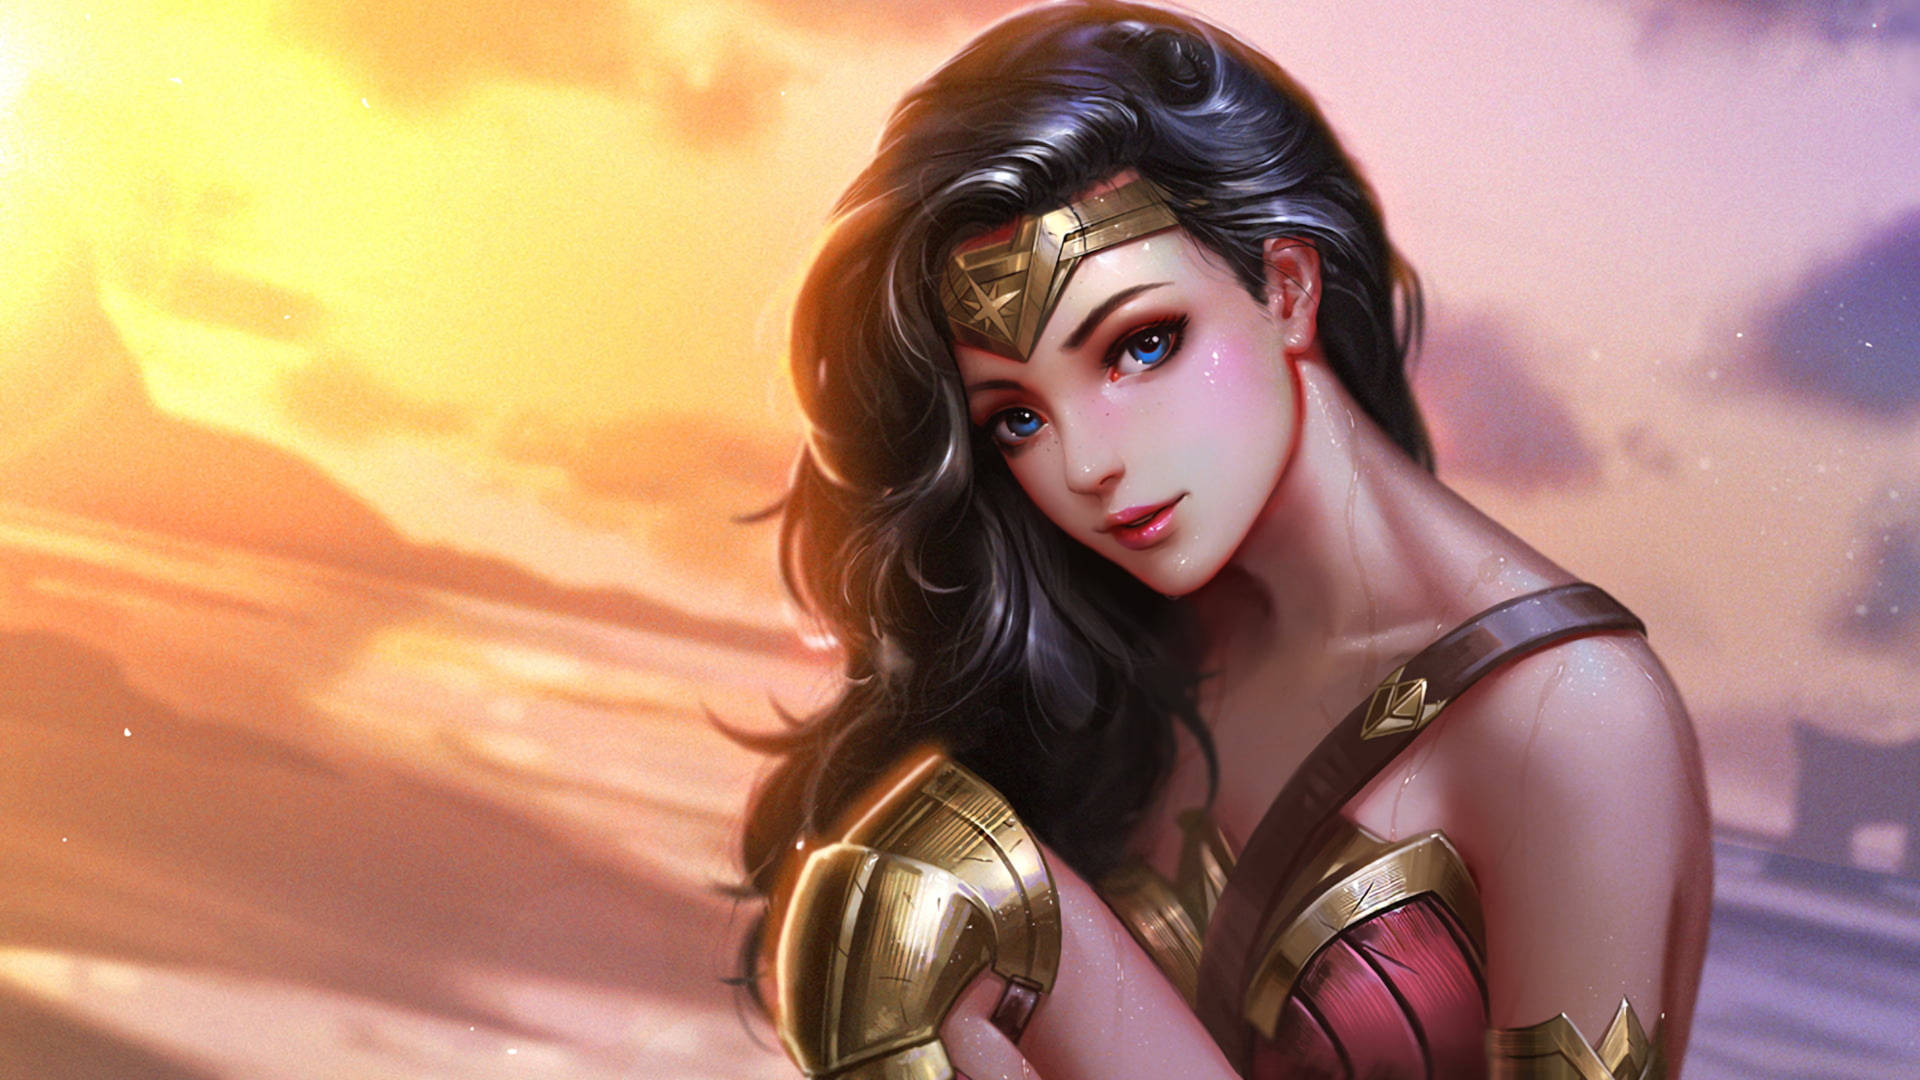 Be inspired by the strength and courage of Wonder Woman Wallpaper